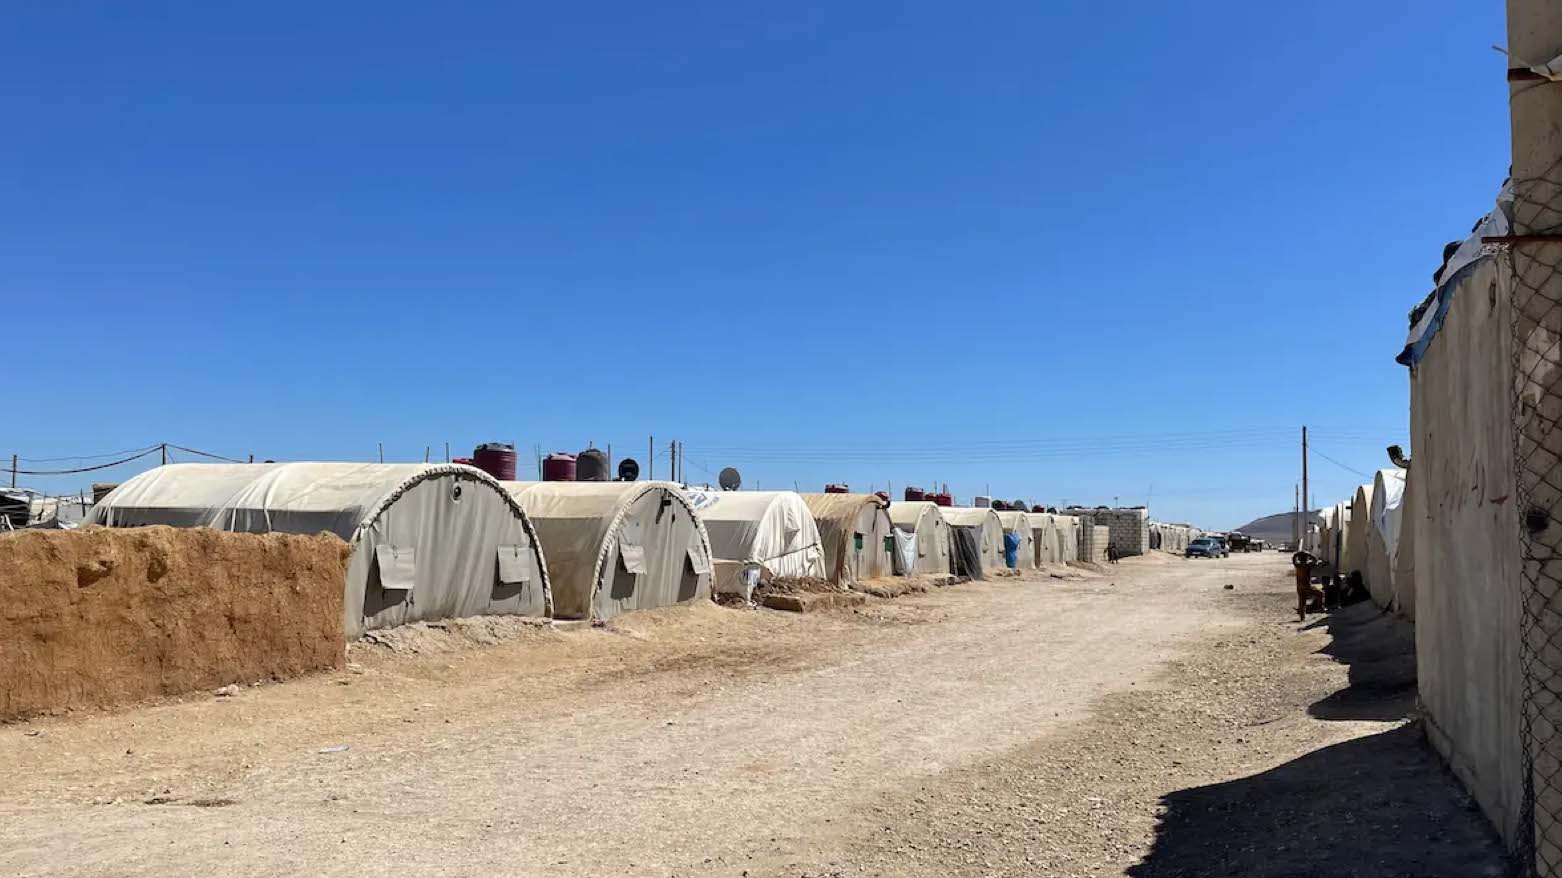 The Serekaniye Camp, which as of Aug. 1, 2023, hosted about 15,570 internally displaced people, Al-Hasakeh governorate, Syria, May 2023 (Photo: Hanan Salah/Human Rights Watch).